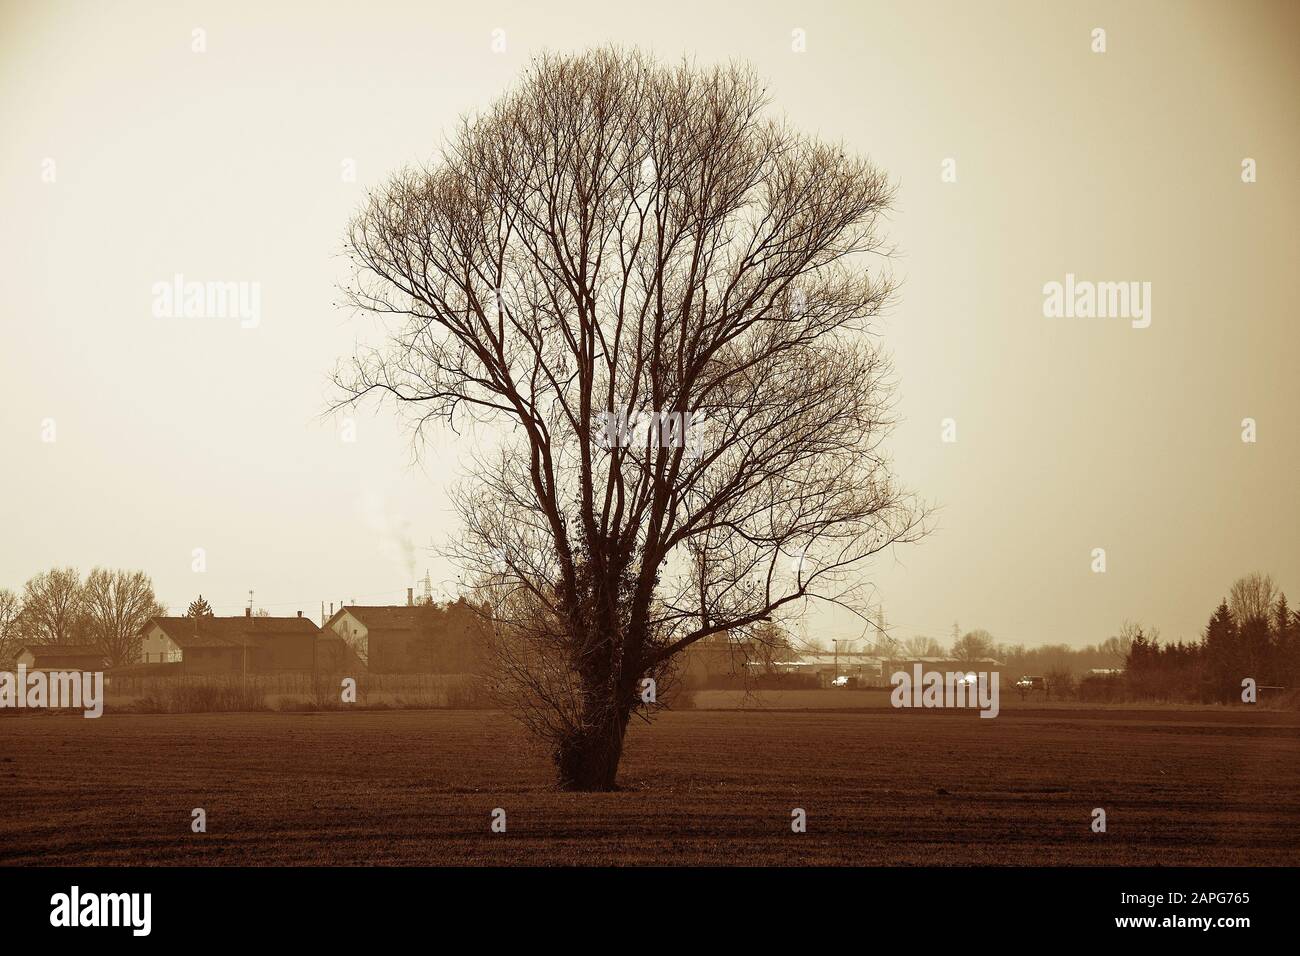 Large tree in the middle of a field, with cars going in the background Stock Photo